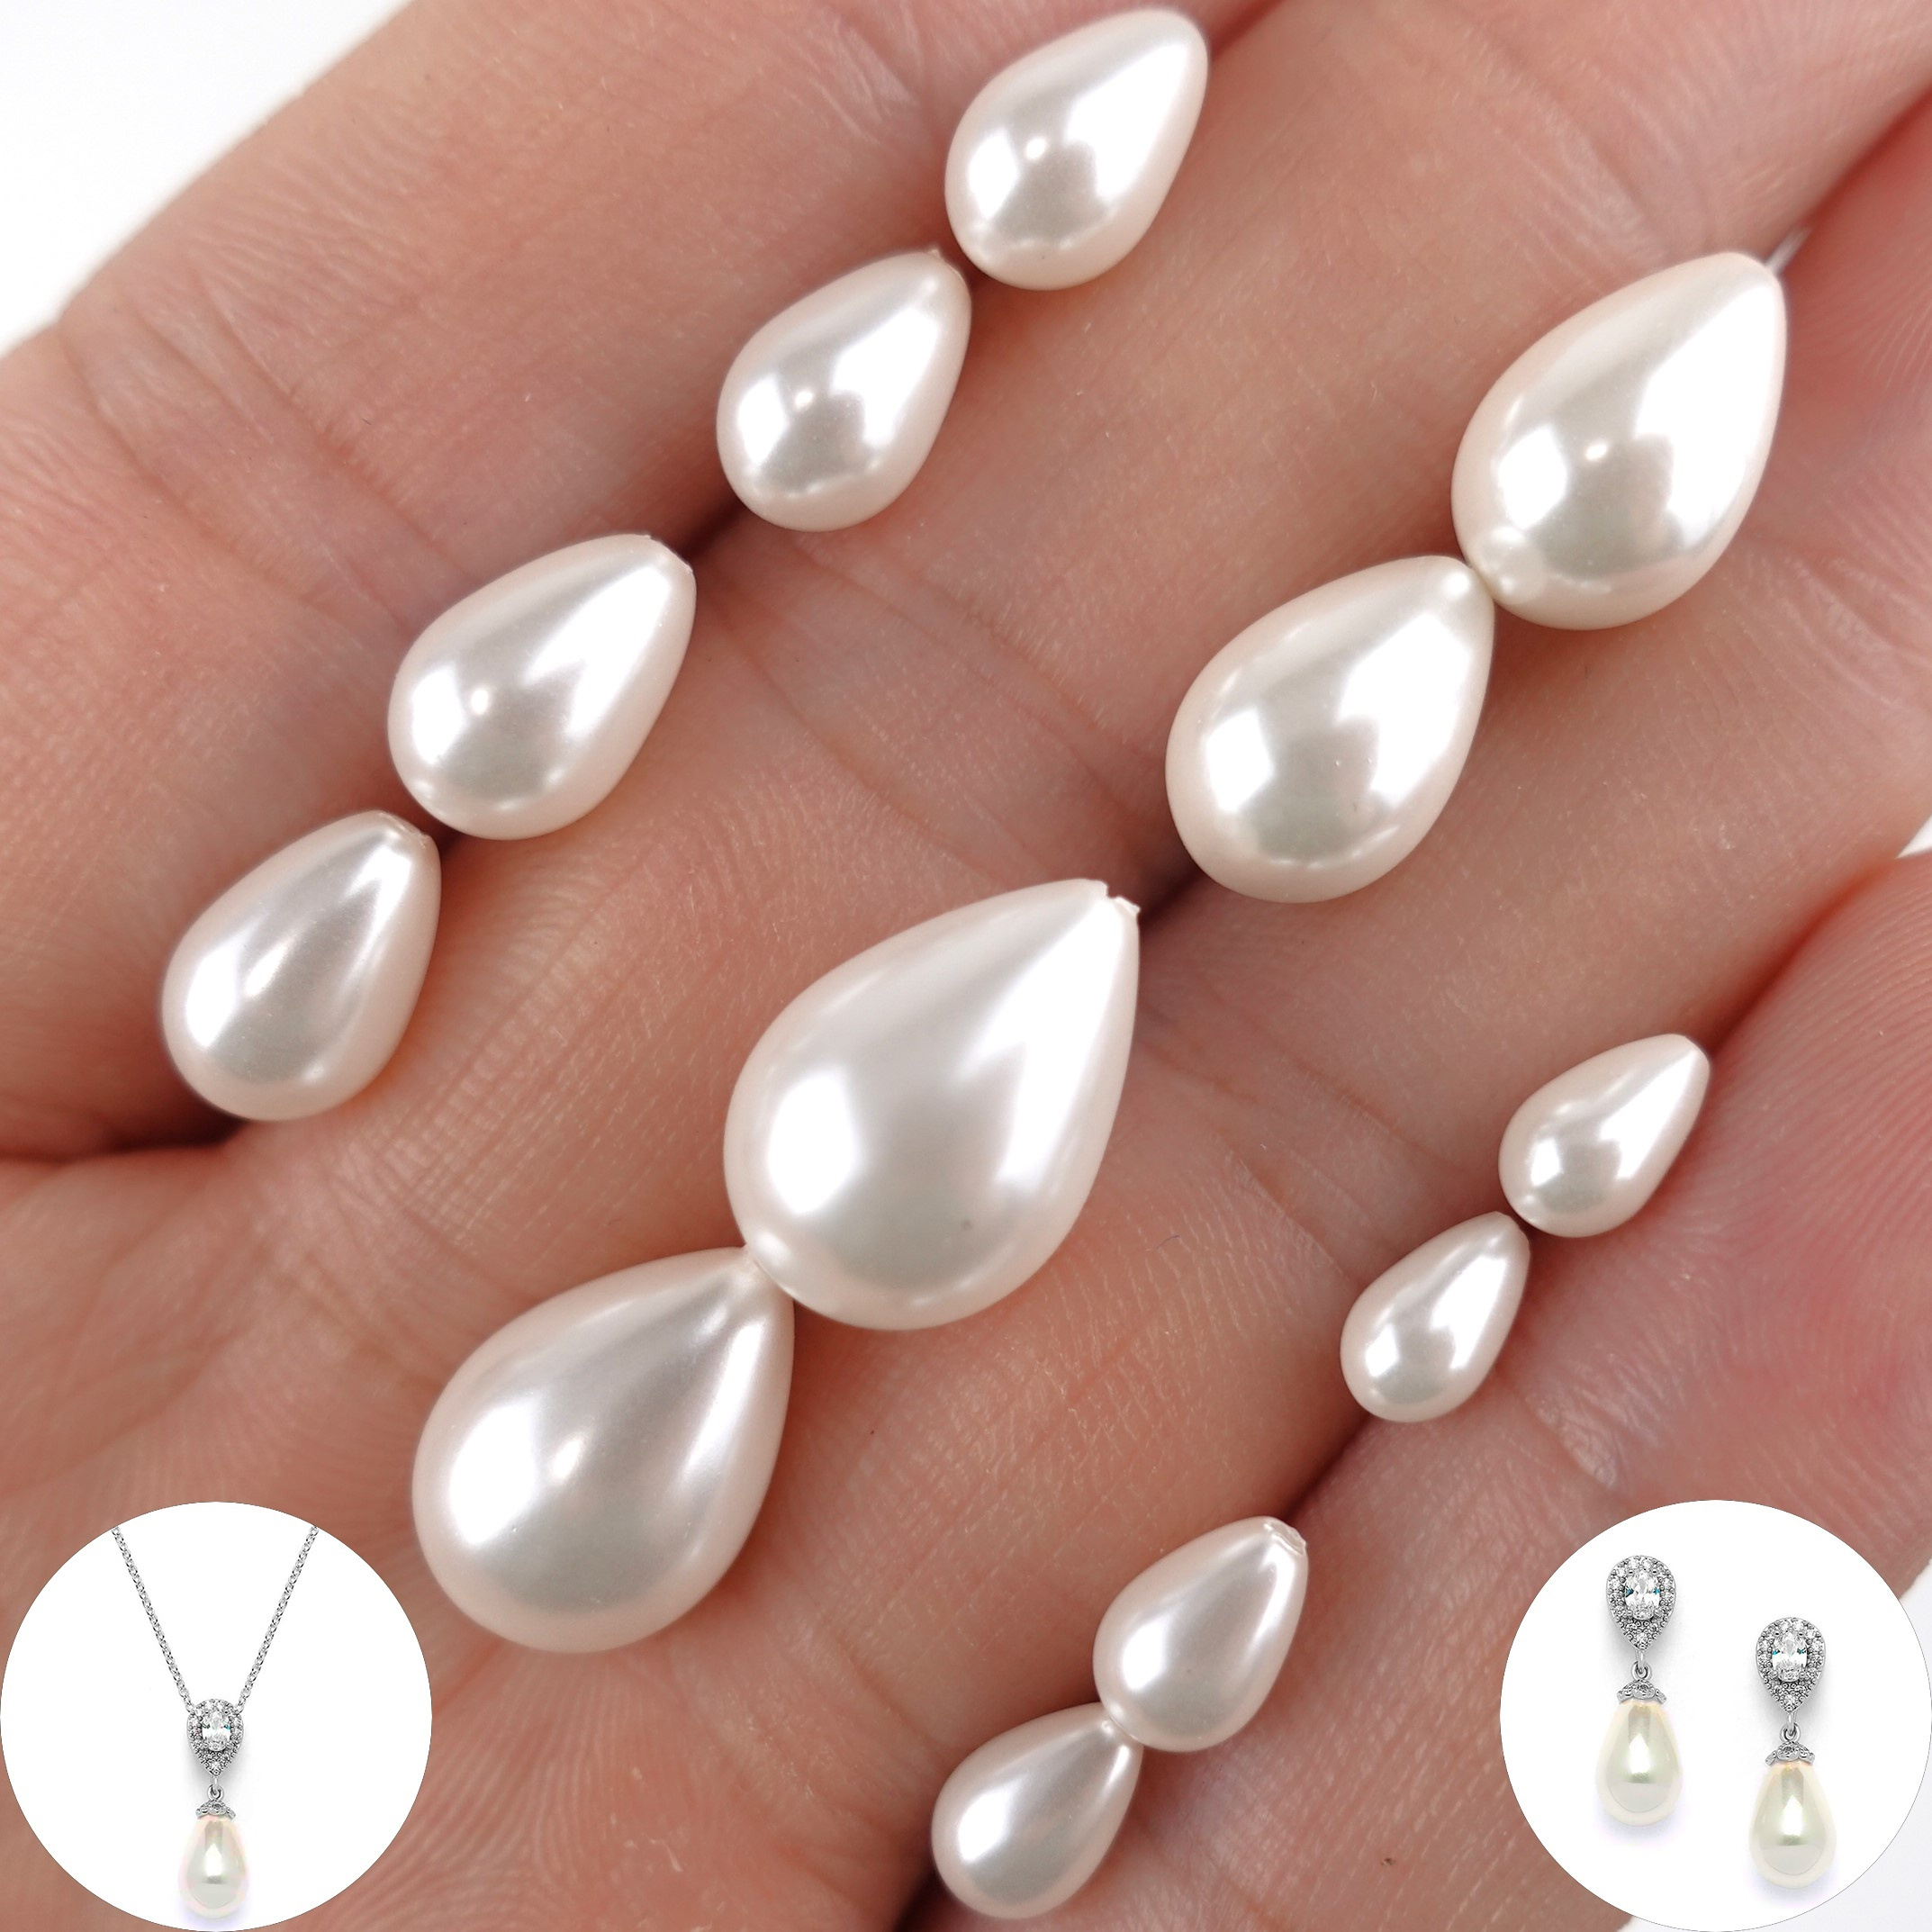 Natural Freshwater Pearl Beads Irregular Flat Rice Shape Punch Loose Beads  For Jewelry Making DIY Necklace Bracelet Irregular Pearl 7-8mm